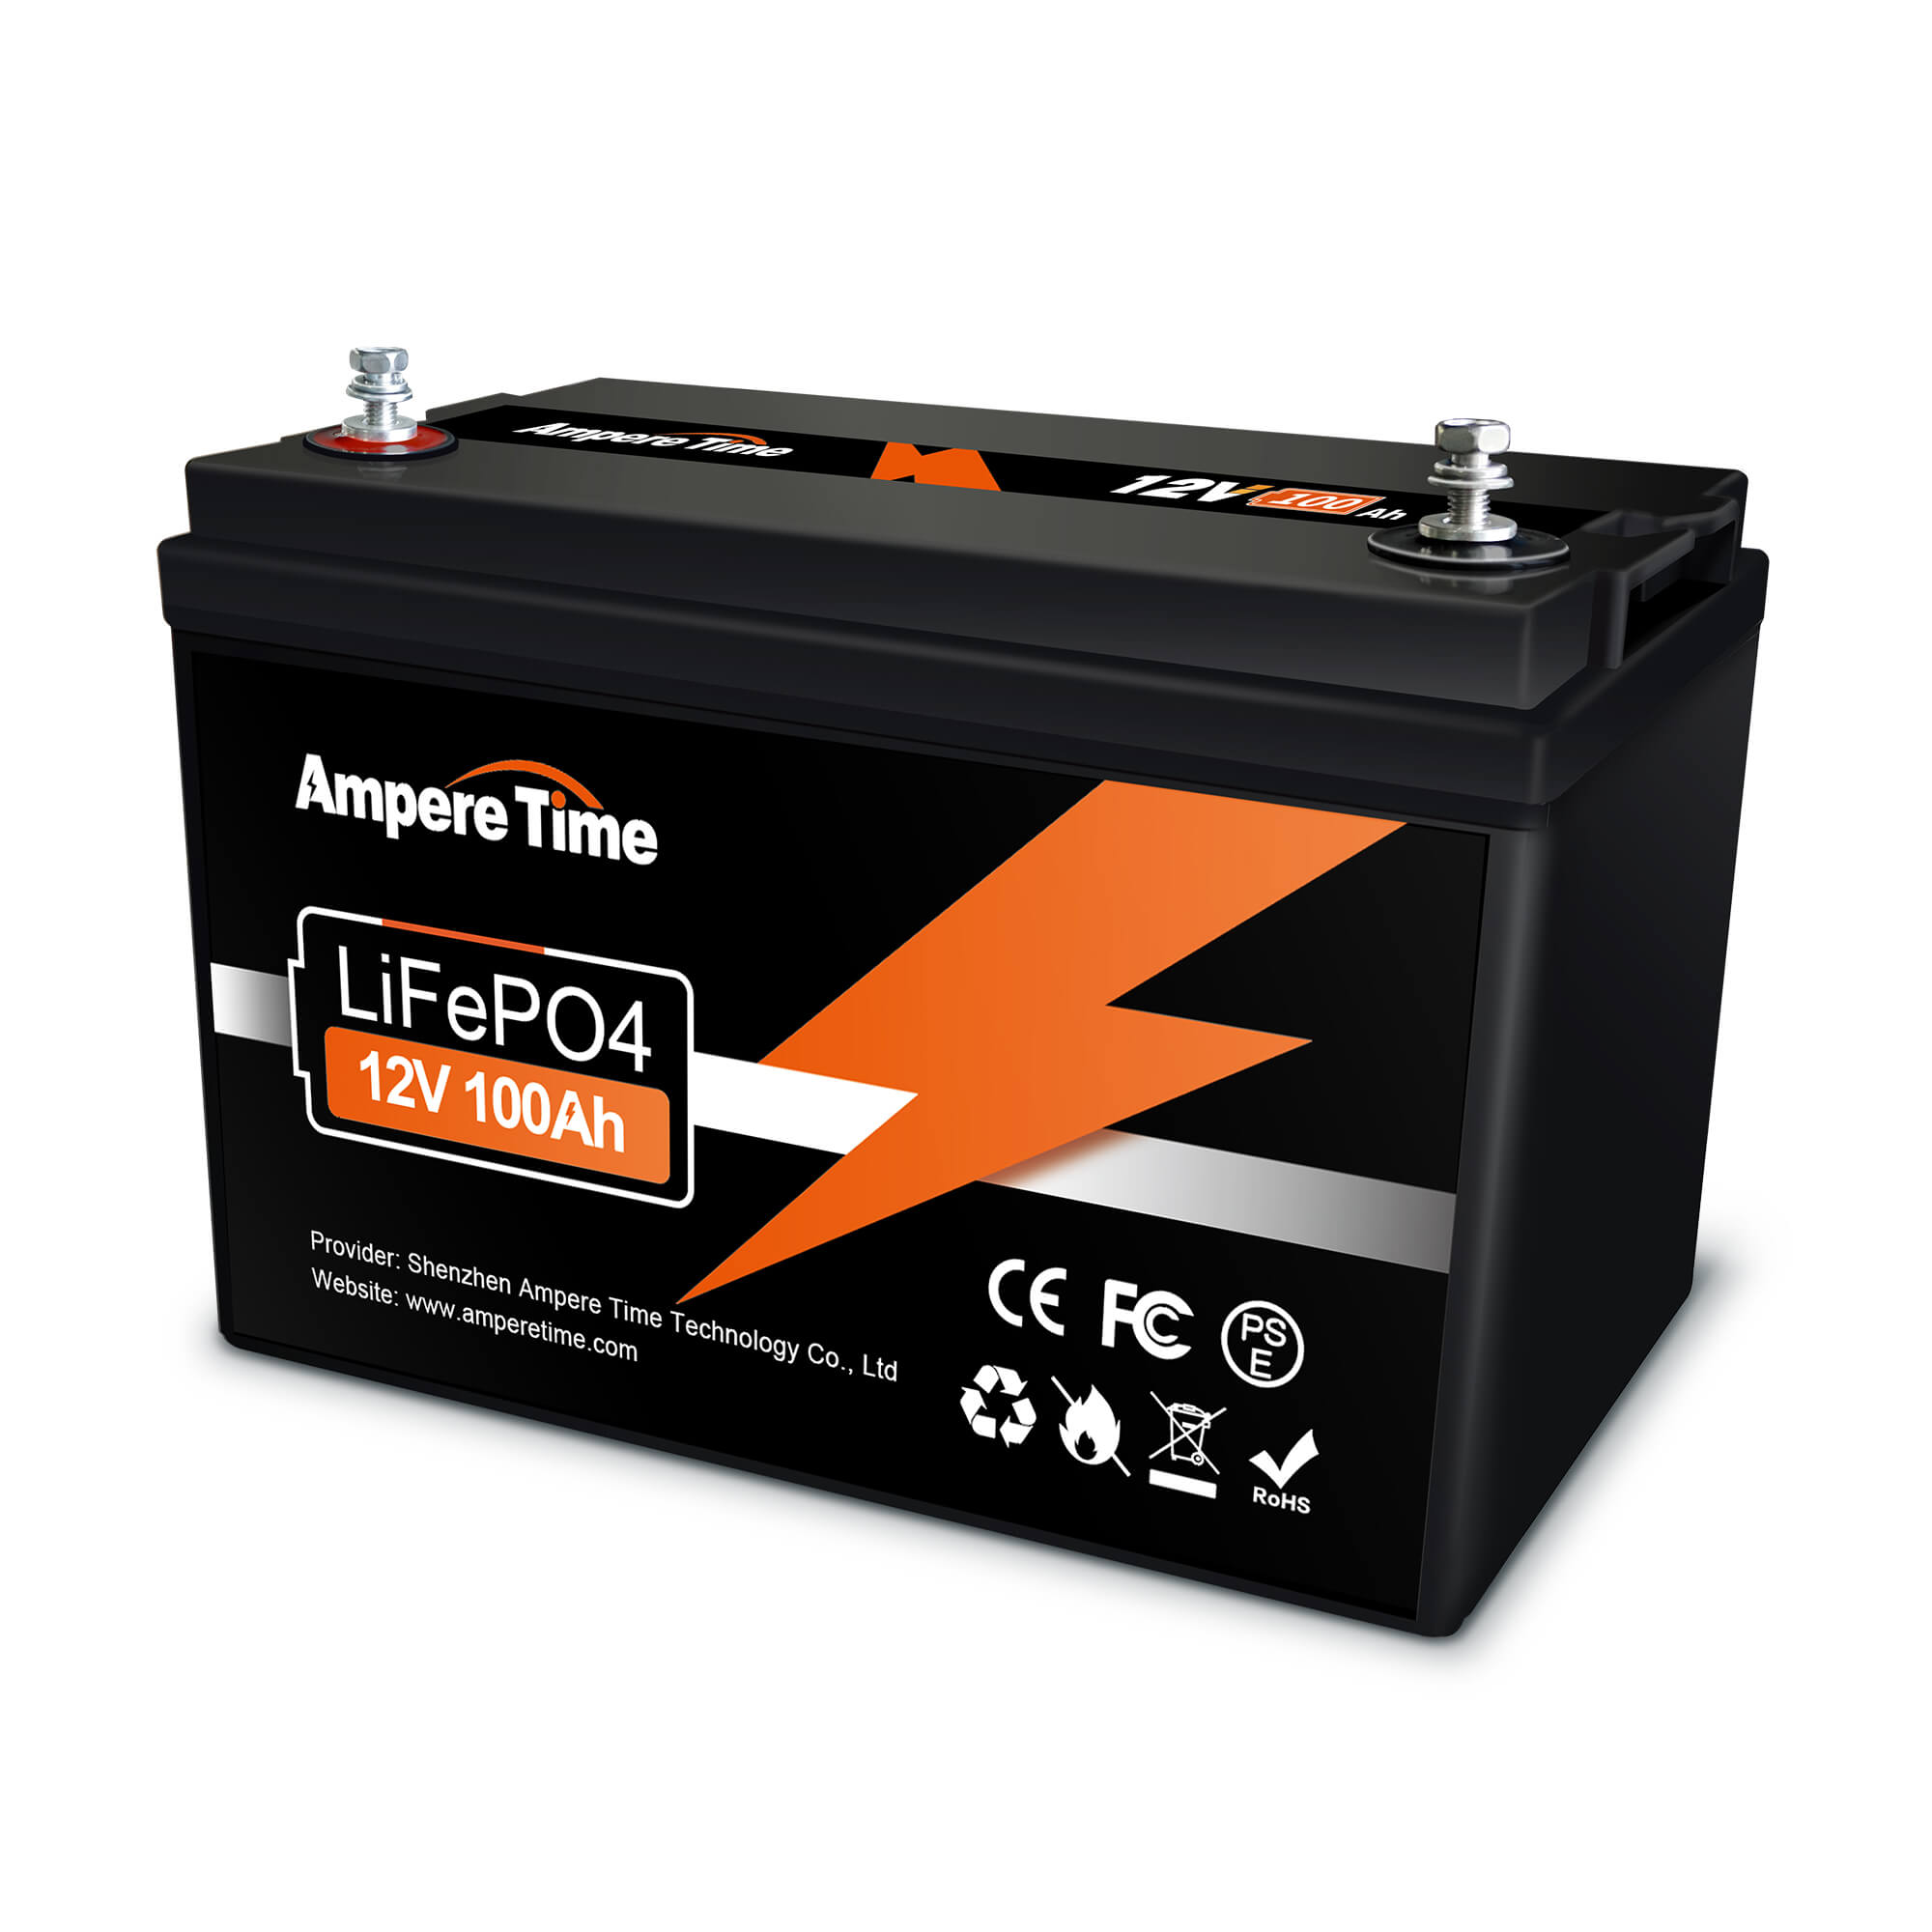 Ampere Time 12V 100Ah Lithium Battery with Self-Heating – Amperetime-US